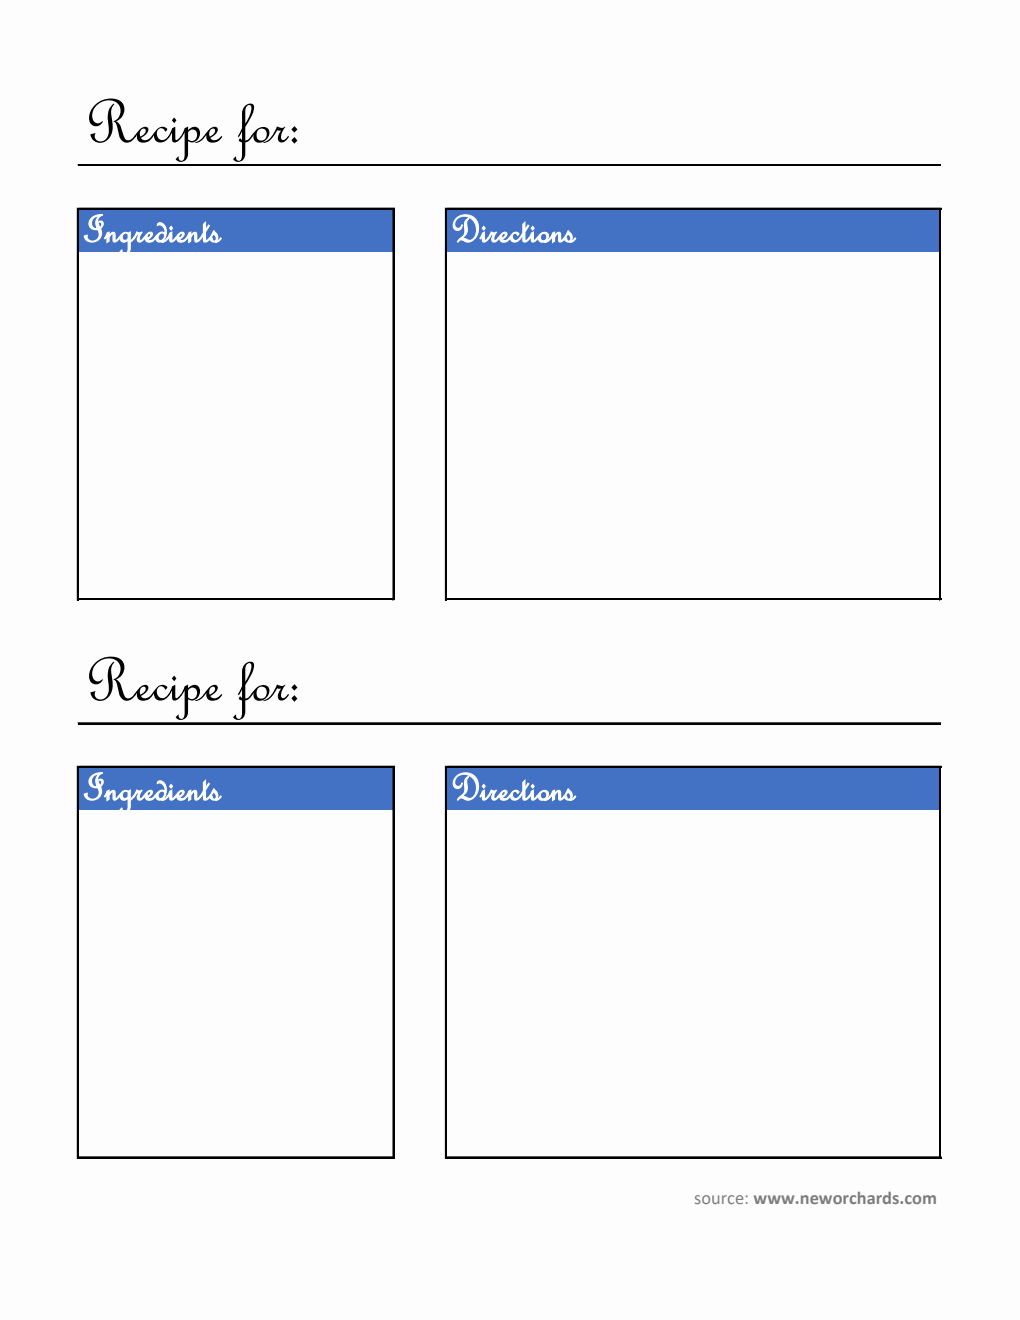 Free Recipe Card Template in Excel Format